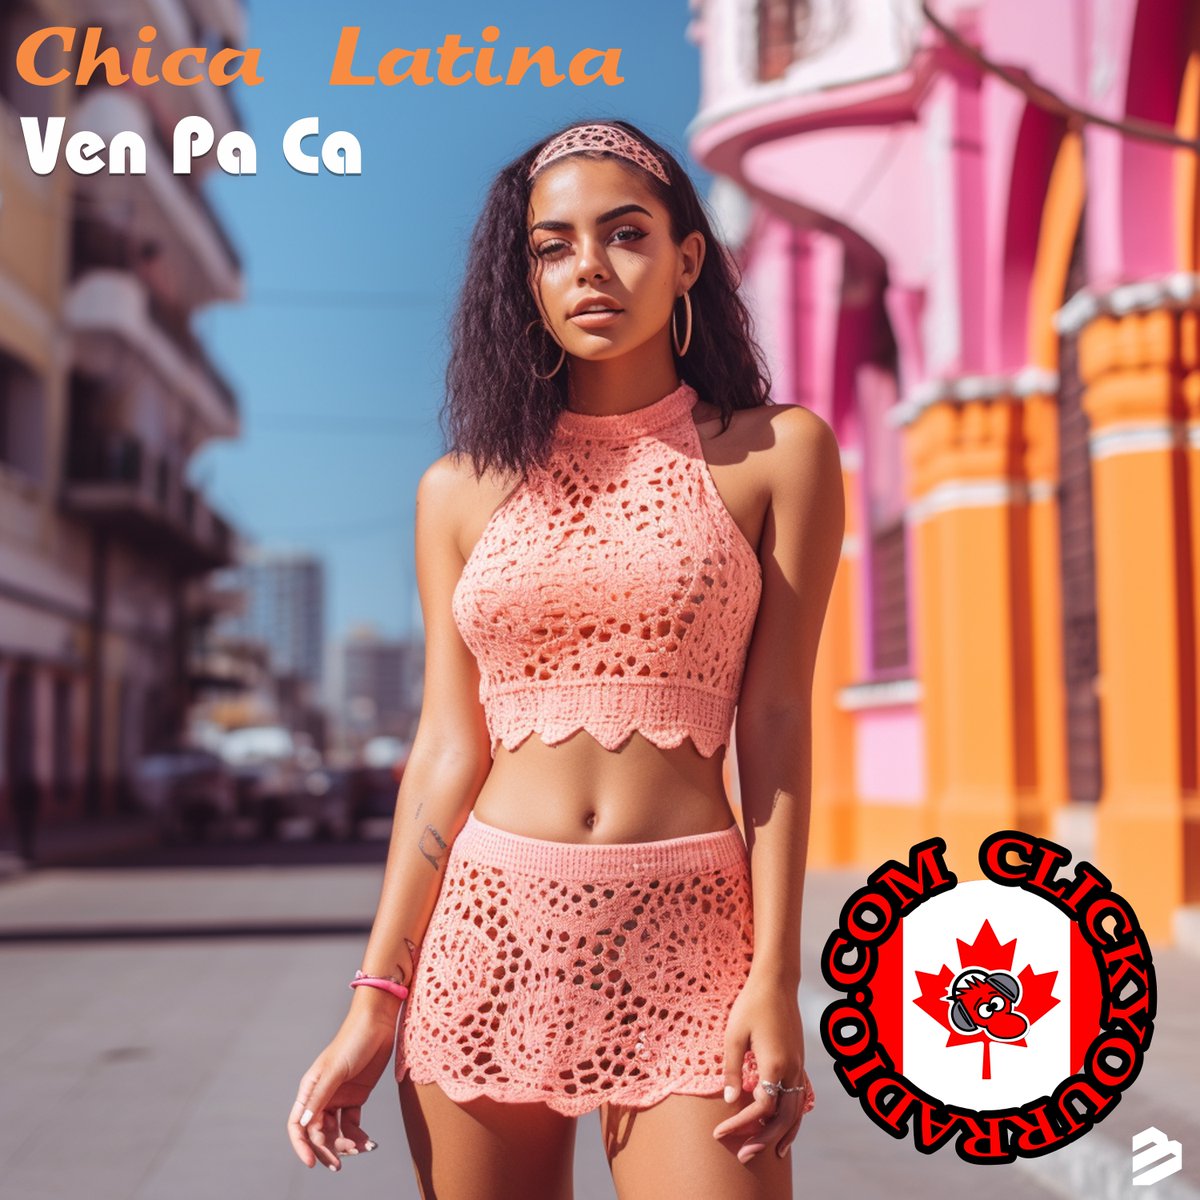 📣THE BEST 🎶MUSIC THIS CENTURY OFFERS📲

🇧🇪Chica Latina- 🎶Ven Pa Ca (2023)

Listen on
📻 CLICKYOURRADIO.COM - HITS
🔊 tinyurl.com/CYRHits1
📲 tinyurl.com/MRPCYRHITS

@BIPRecords #hits #hitsong #hitssong #hitssongs #hitradio #hit2023